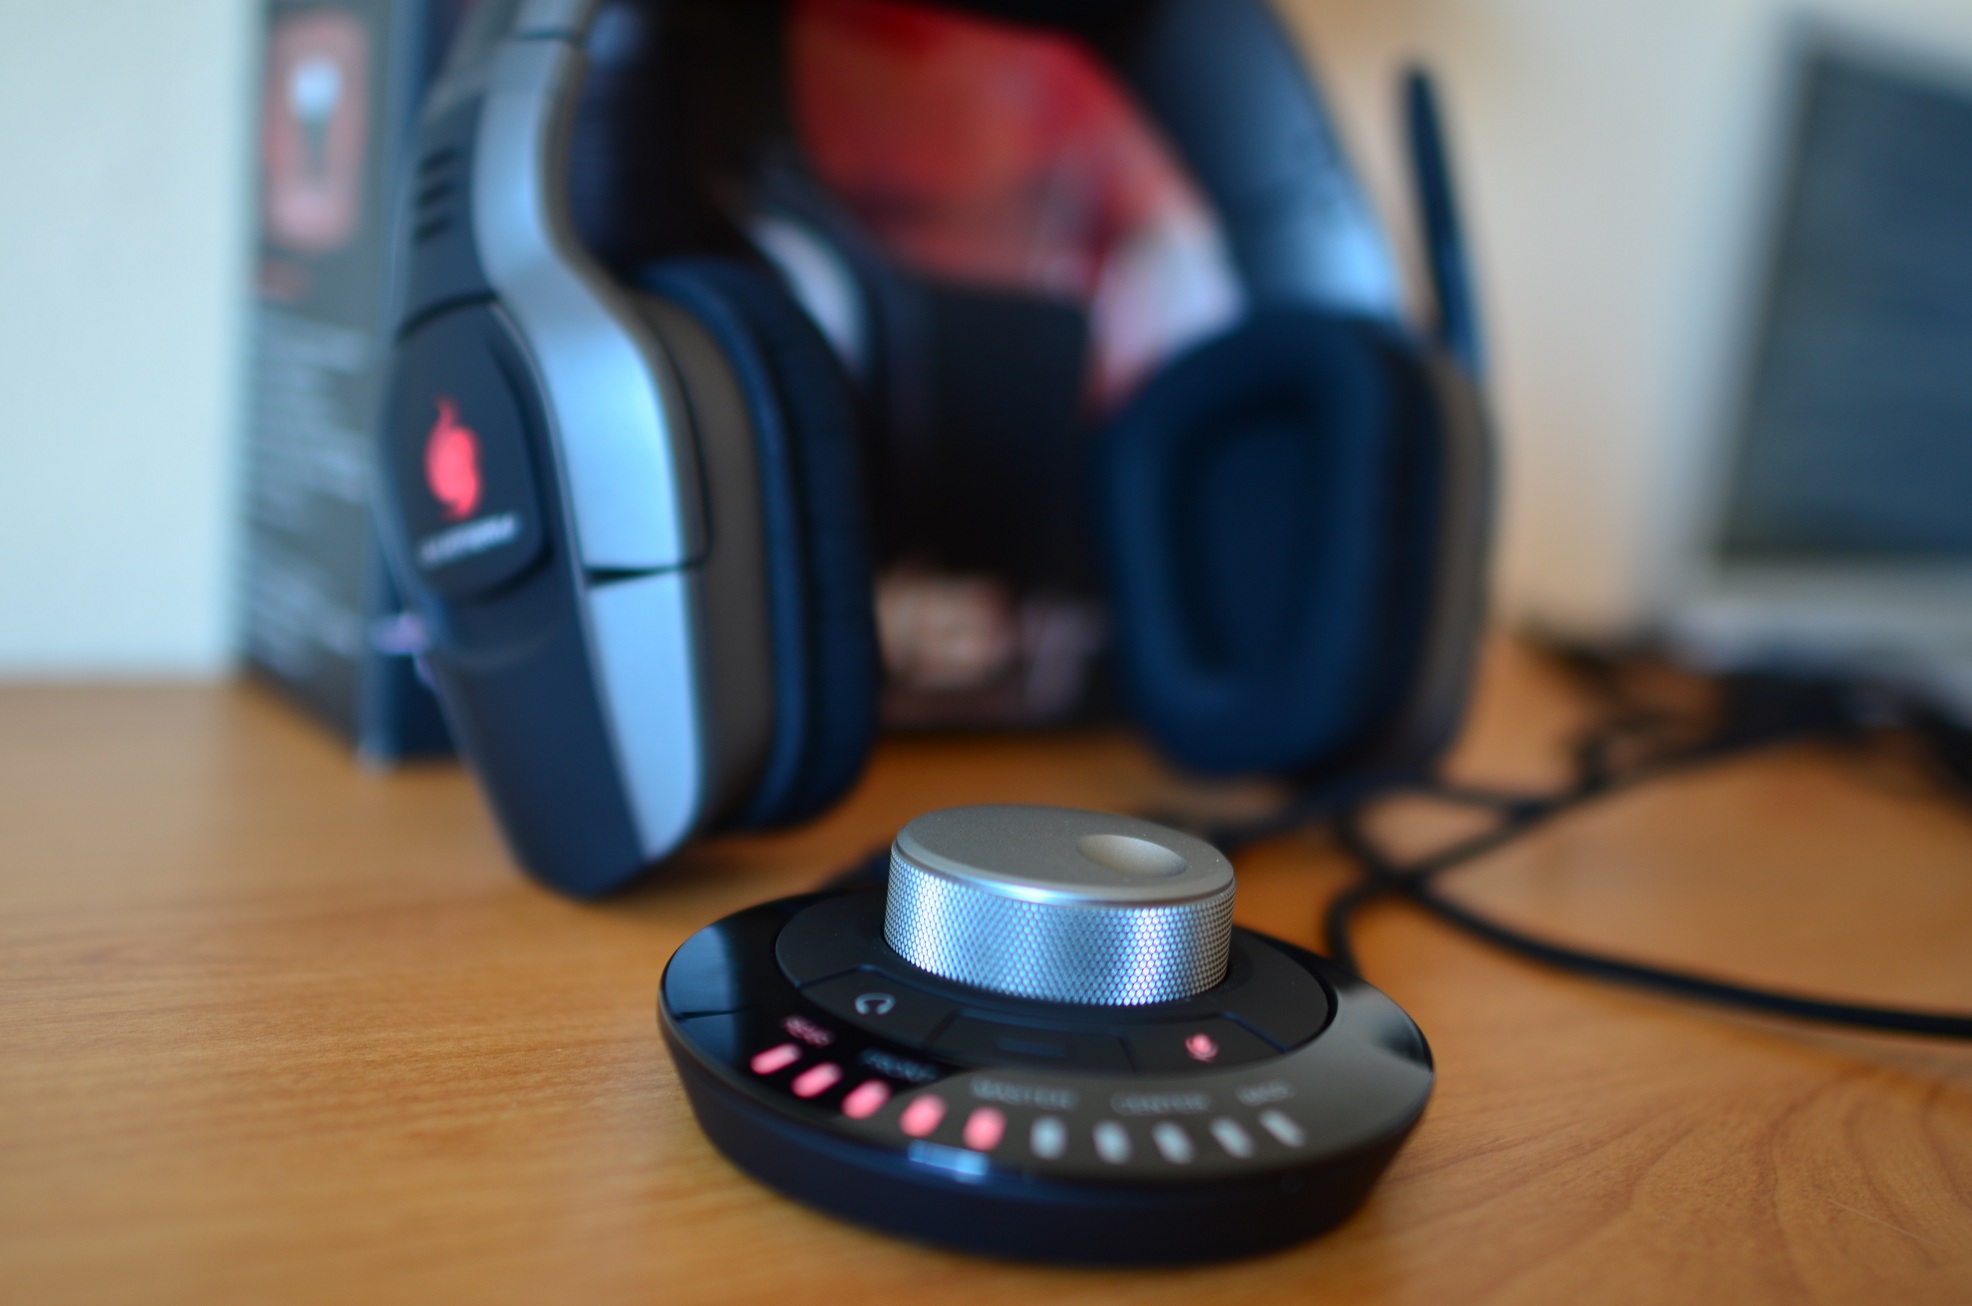 CM Storm Sirus 5.1 Surround Sound Gaming Headset Review (Cooler Master)